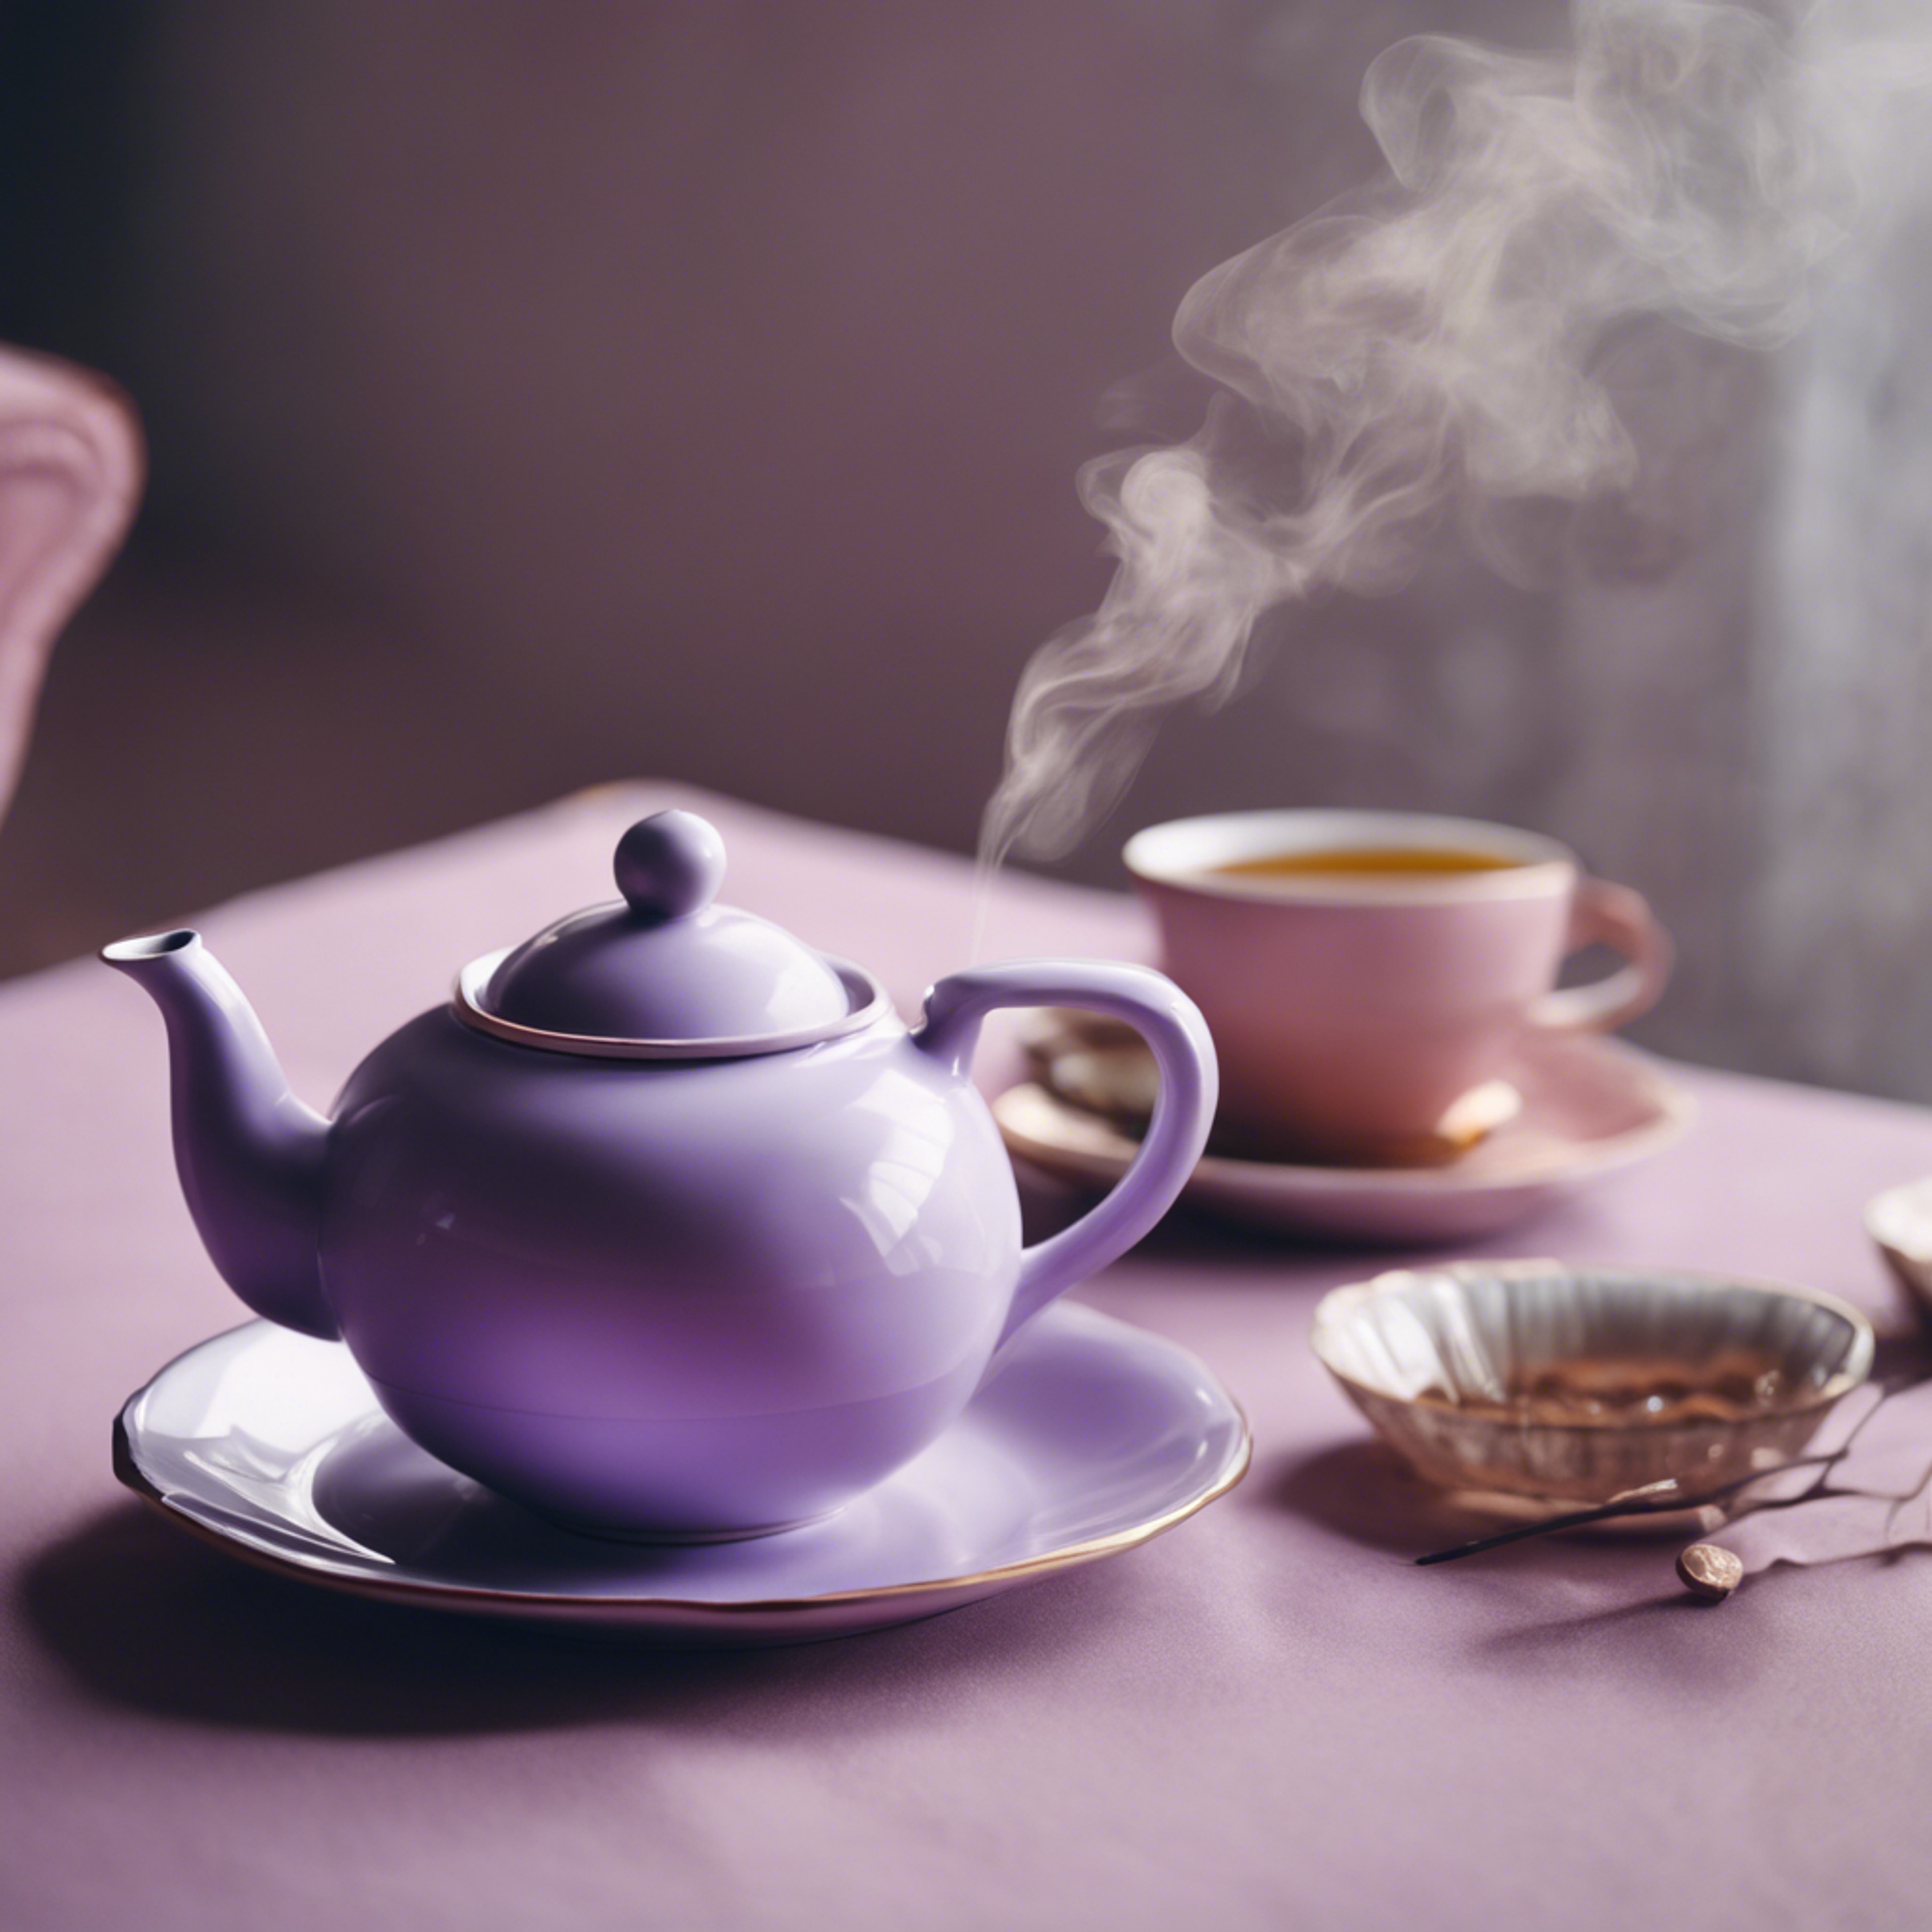 A still life of a pastel purple teapot with matching teacup filled with steaming hot tea. Wallpaper[7928fec6cd4746d98db5]